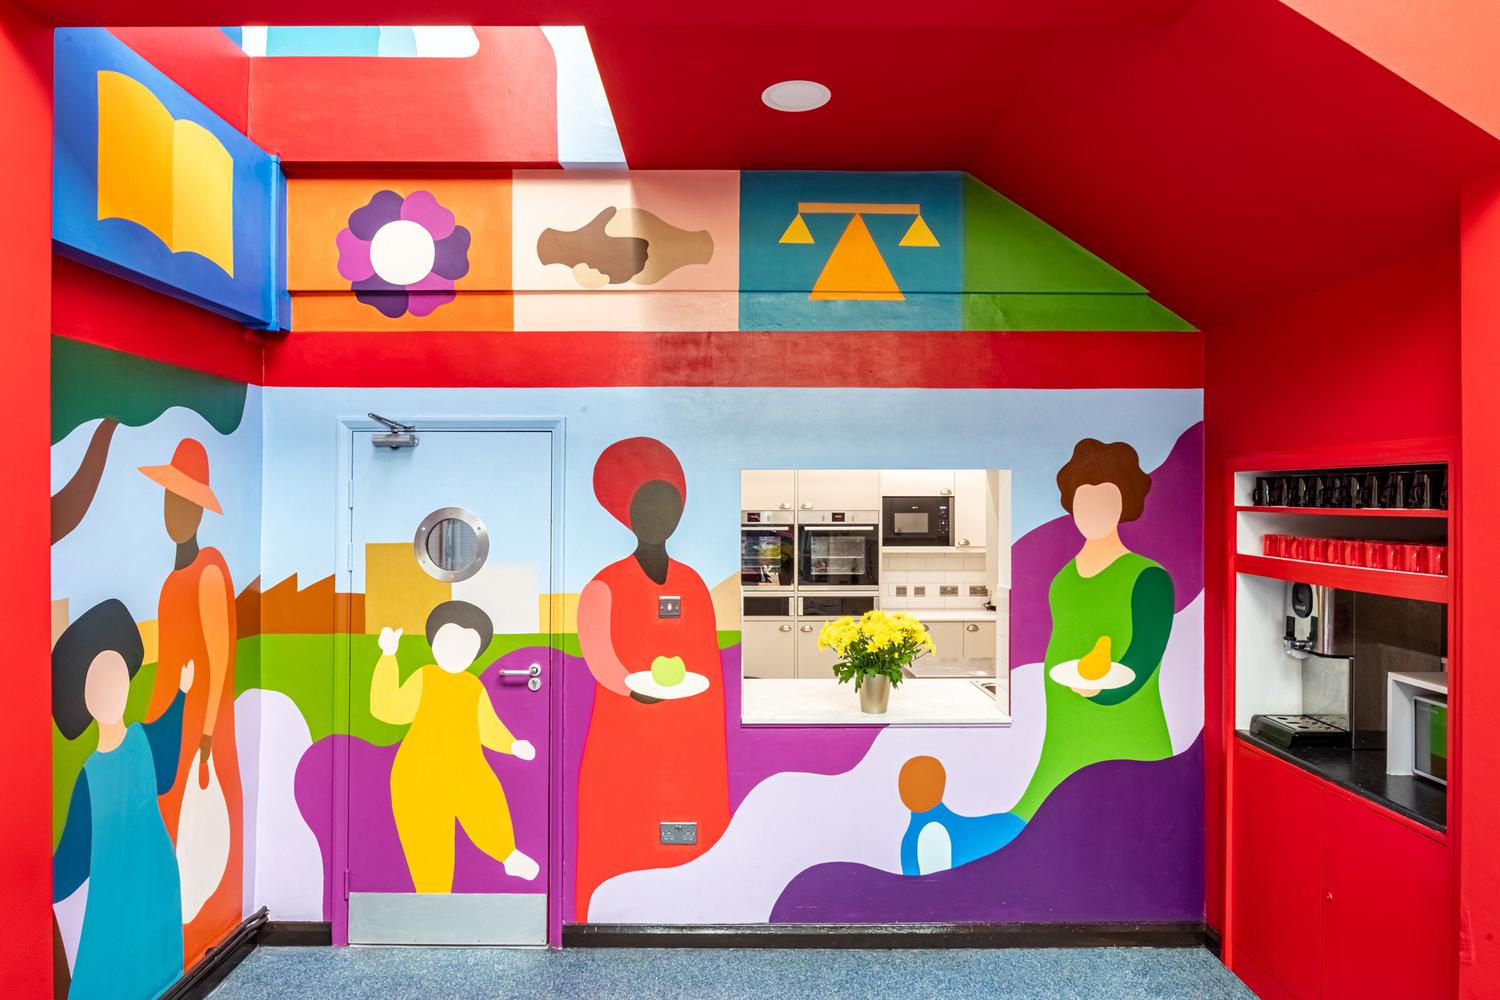 Community centre interior space with colorful mural